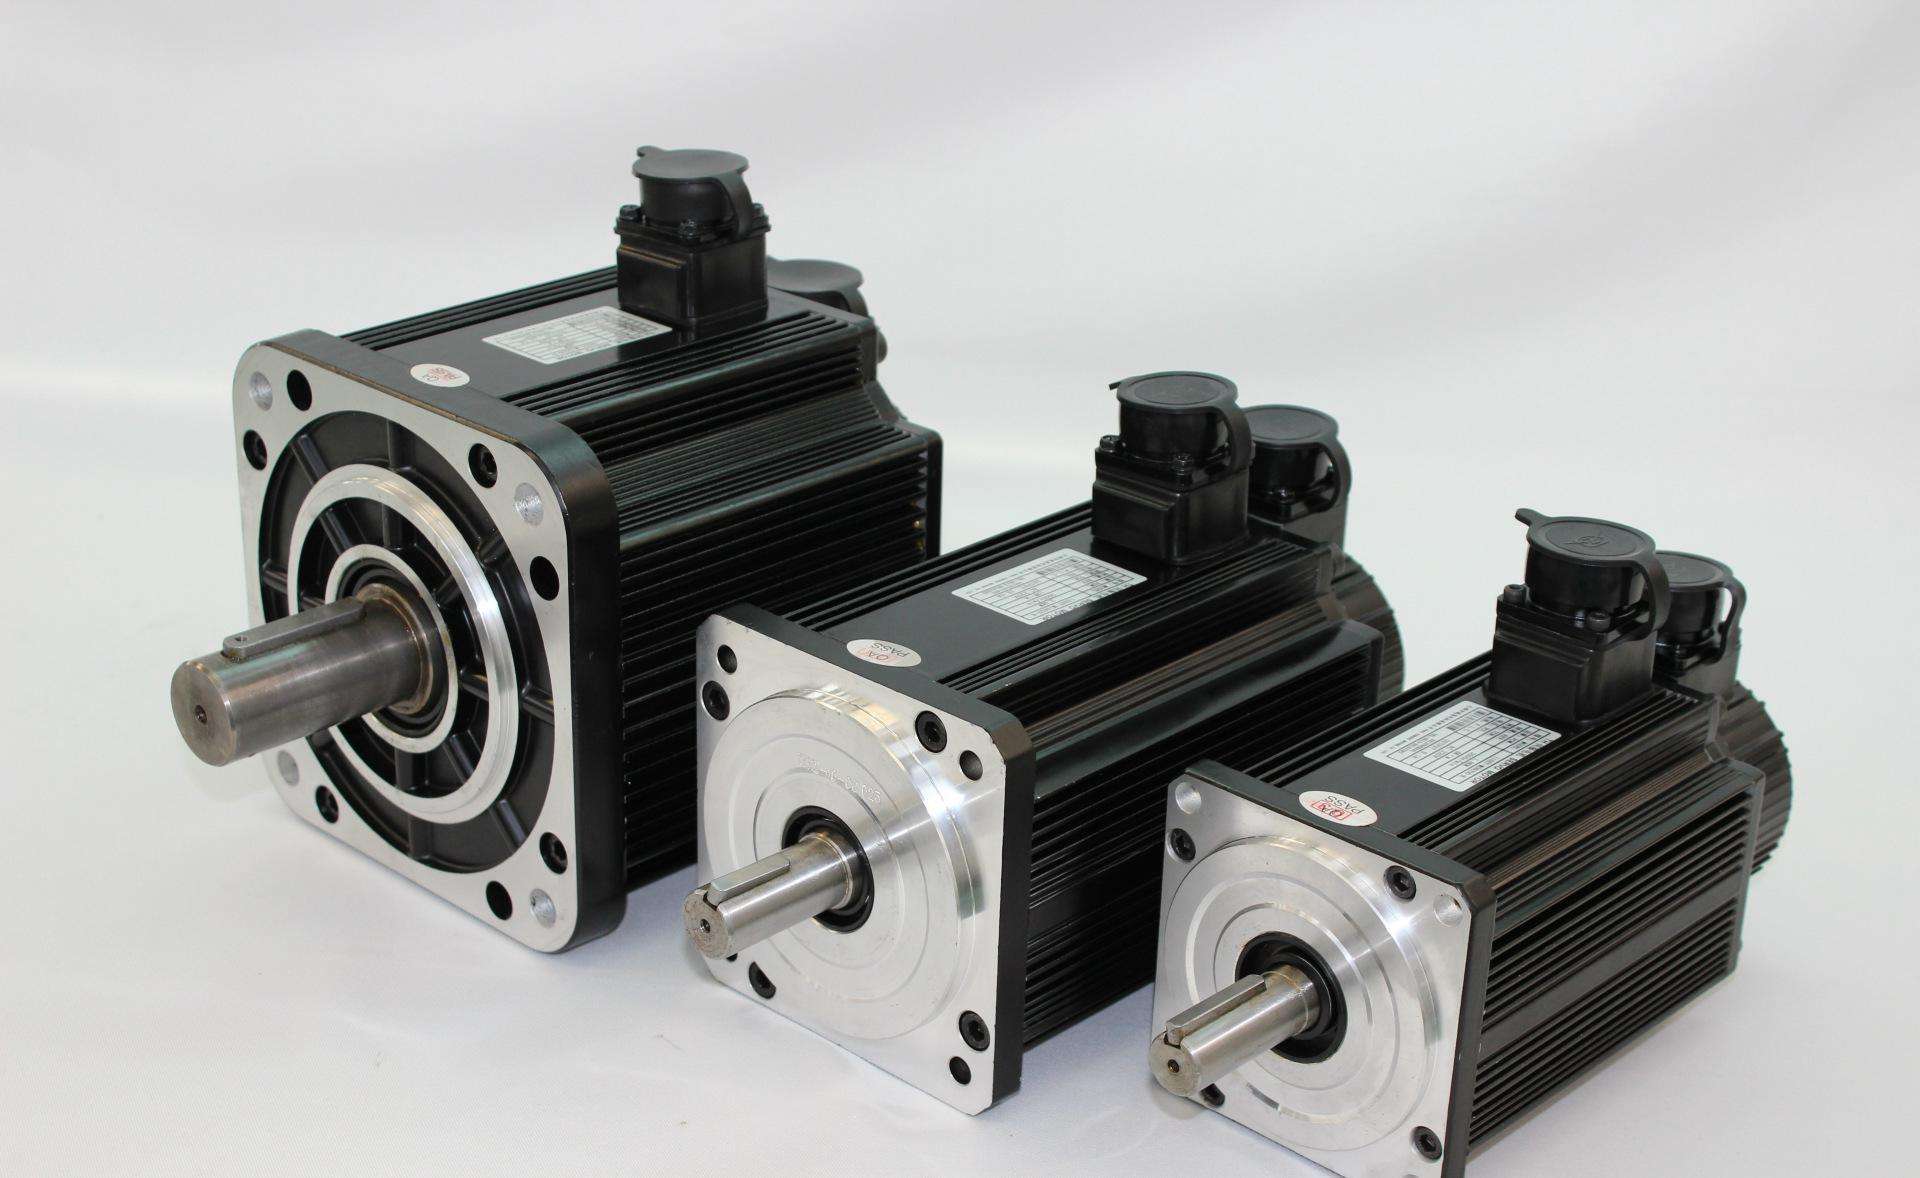 The difference between stepper motor and servo motor